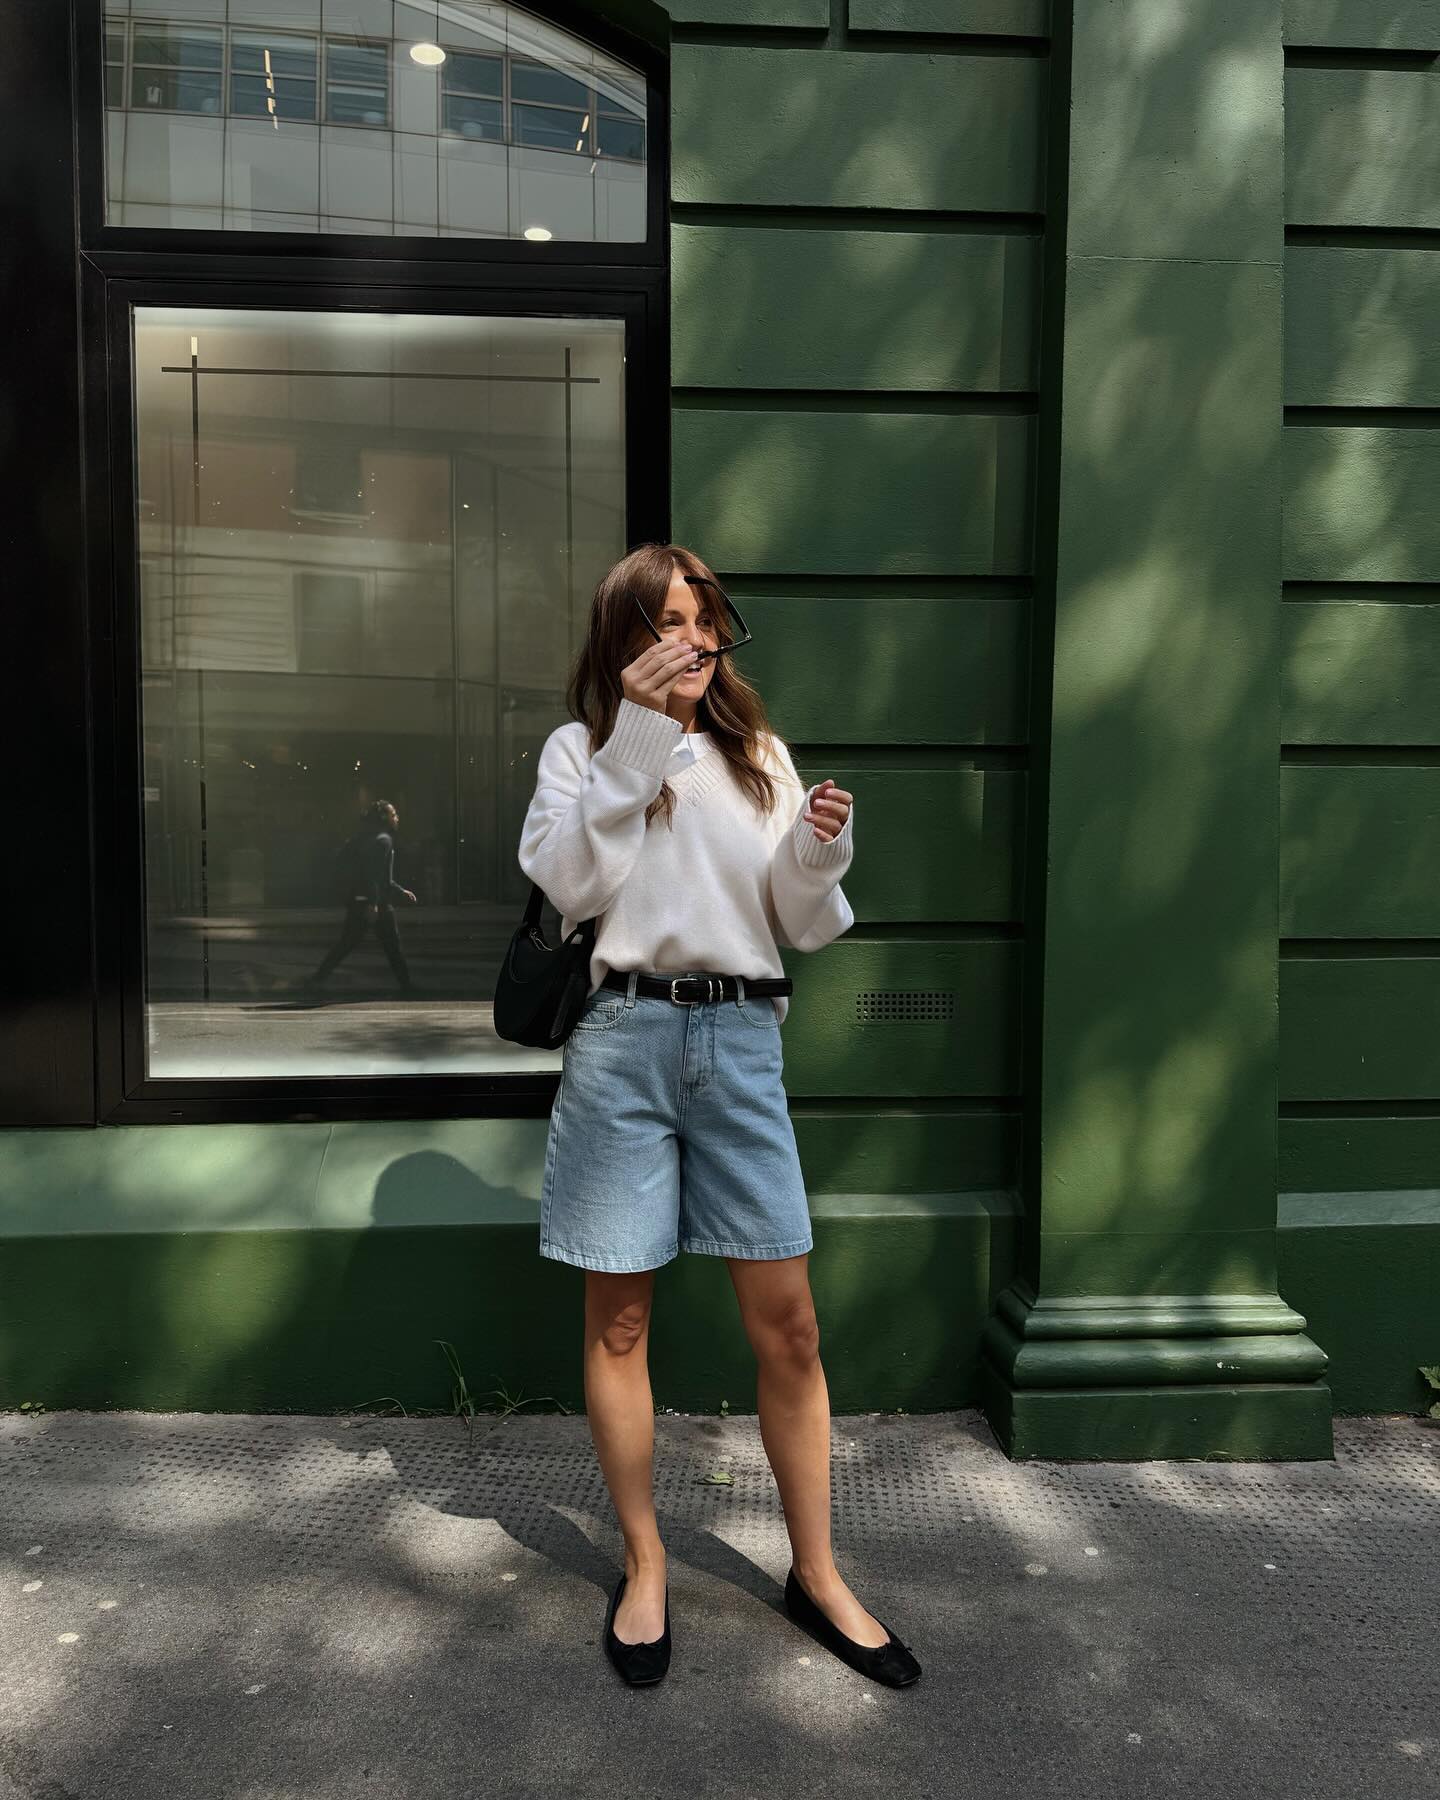 Woman on street wears white sweater, blue long shorts and ballet flats